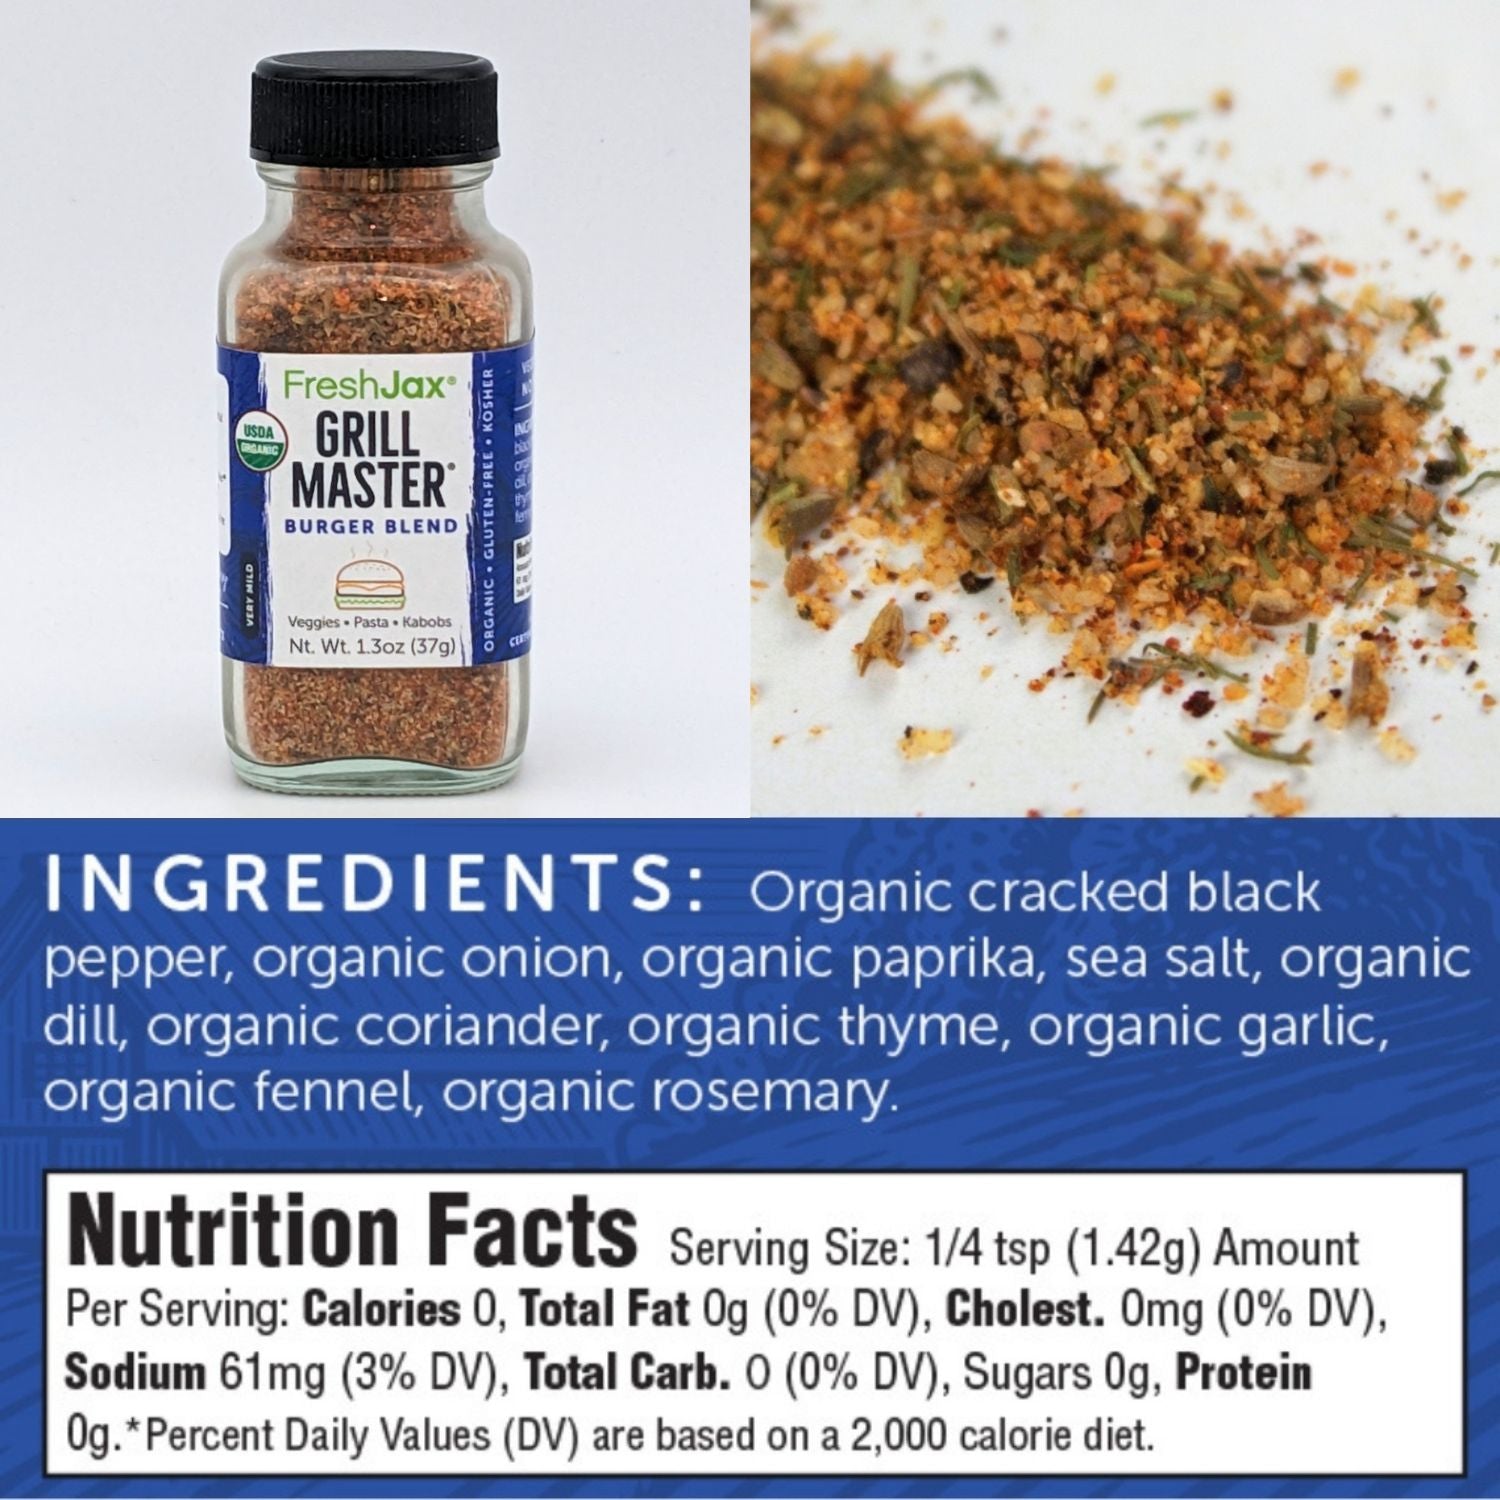 FreshJax Grill Master Burger Ingredients and Nutritional Information